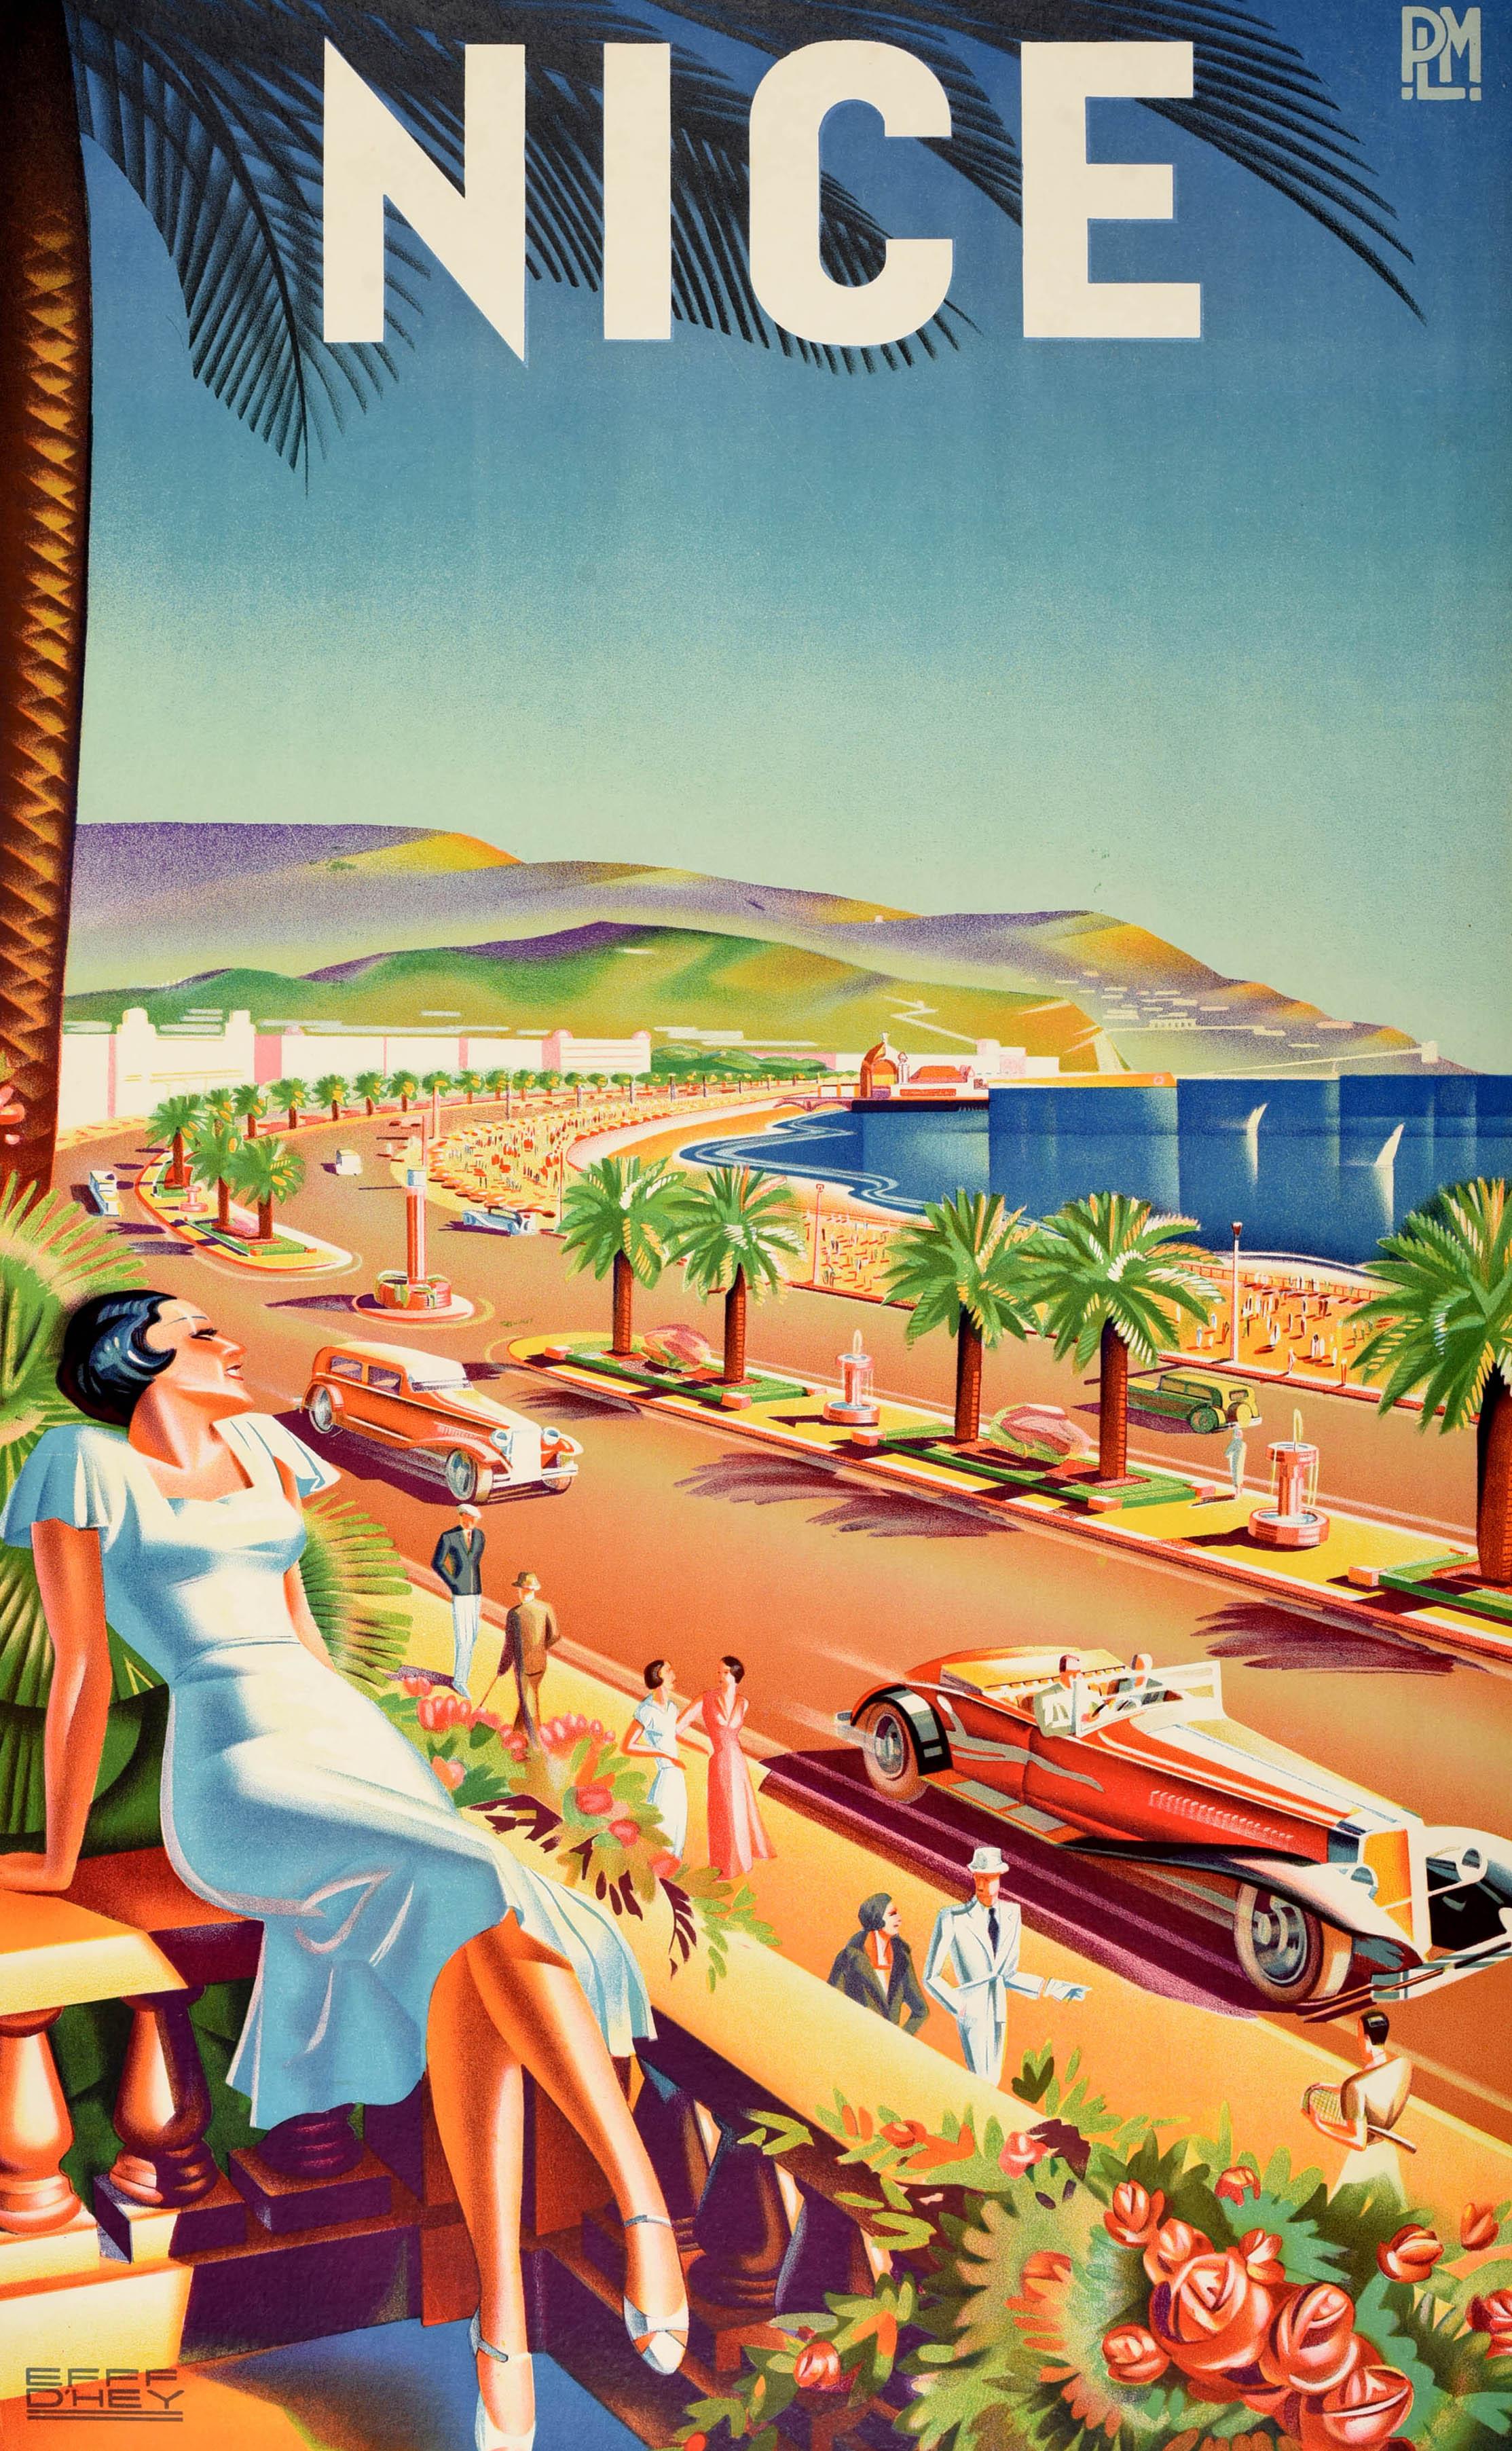 Original vintage Art Deco travel poster issued by the PLM Paris Lyon Mediterranee railway for Nice featuring stunning artwork depicting an elegant lady relaxing on a balcony with a view of fashionably dressed people walking next to classic cars on